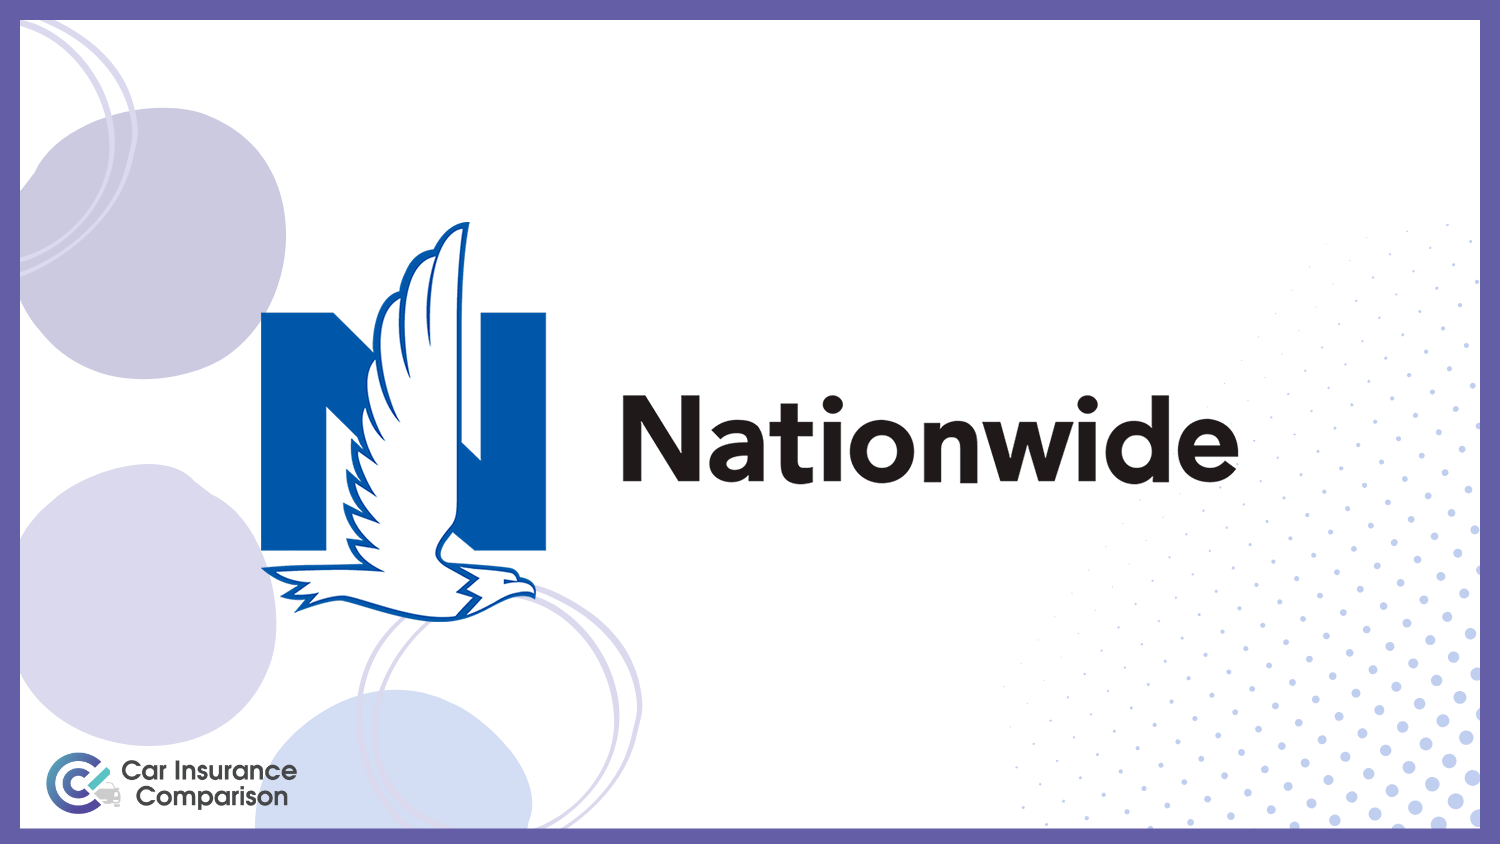 Nationwide: Best Car Insurance for Low-Income Drivers